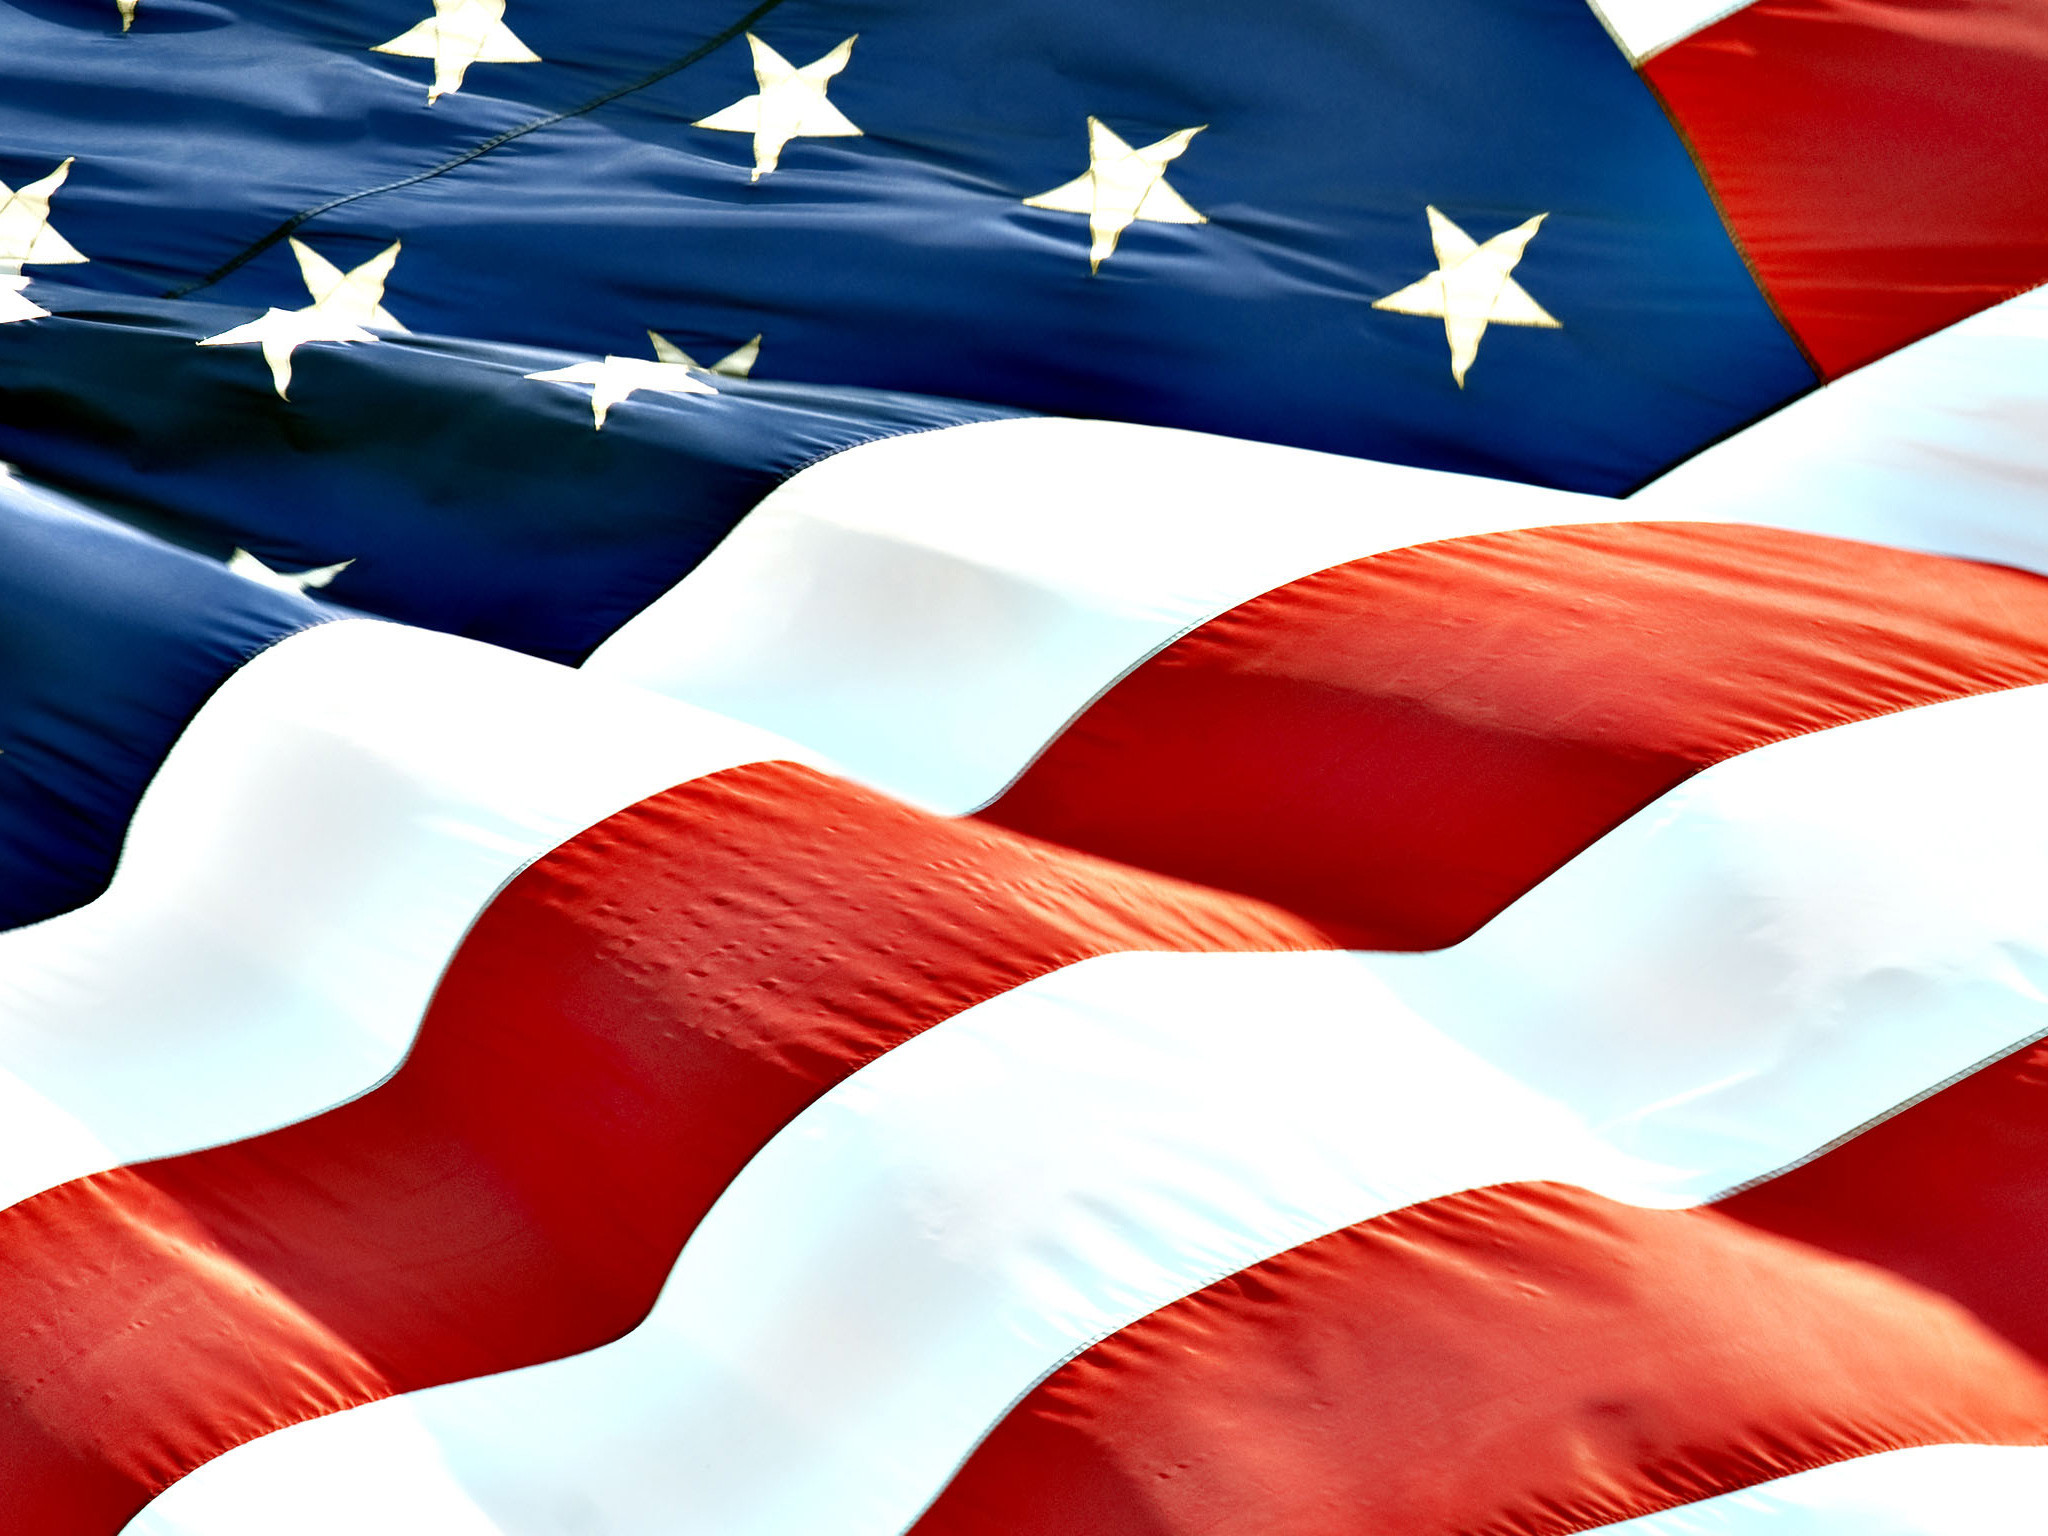 2048x1536 Download United States of America flag Free Retina Wallpaper For iPad